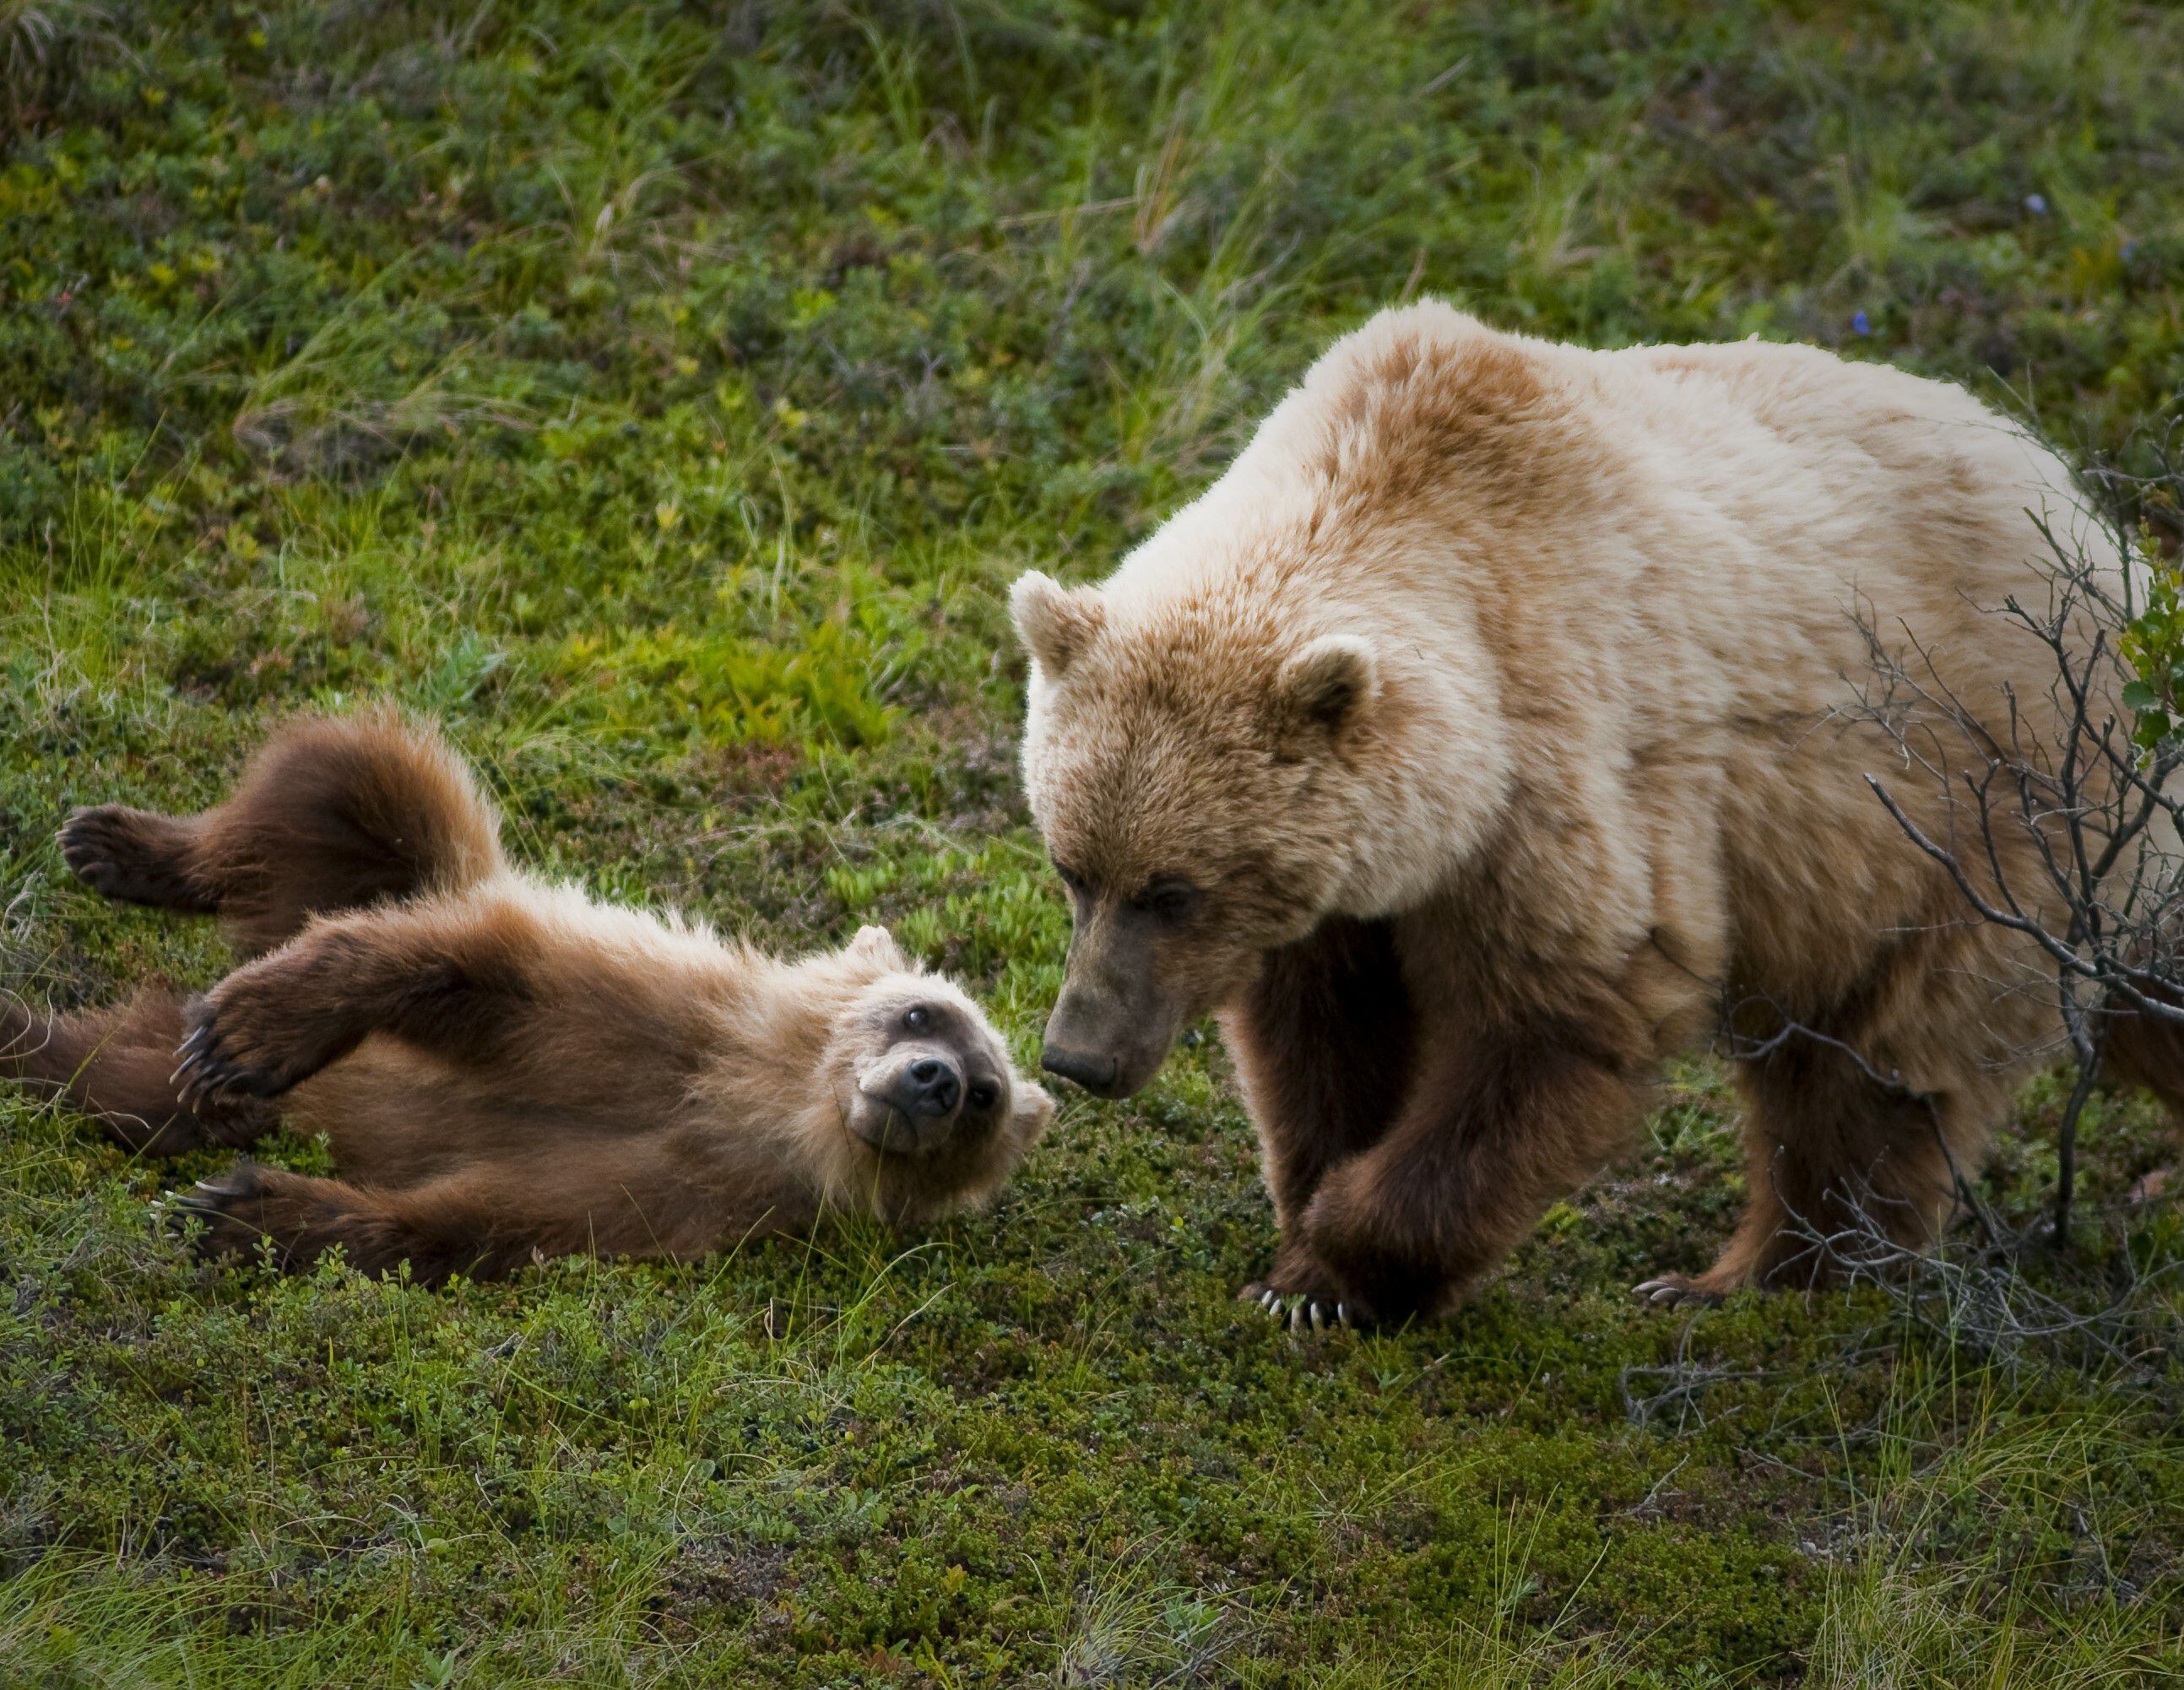 A grizzly bear and cub in an undated photo provided by the National Park Service. NPS and the U.S. Fish and Wildlife Service will help restore grizzly bears to the North Cascades in Washington.